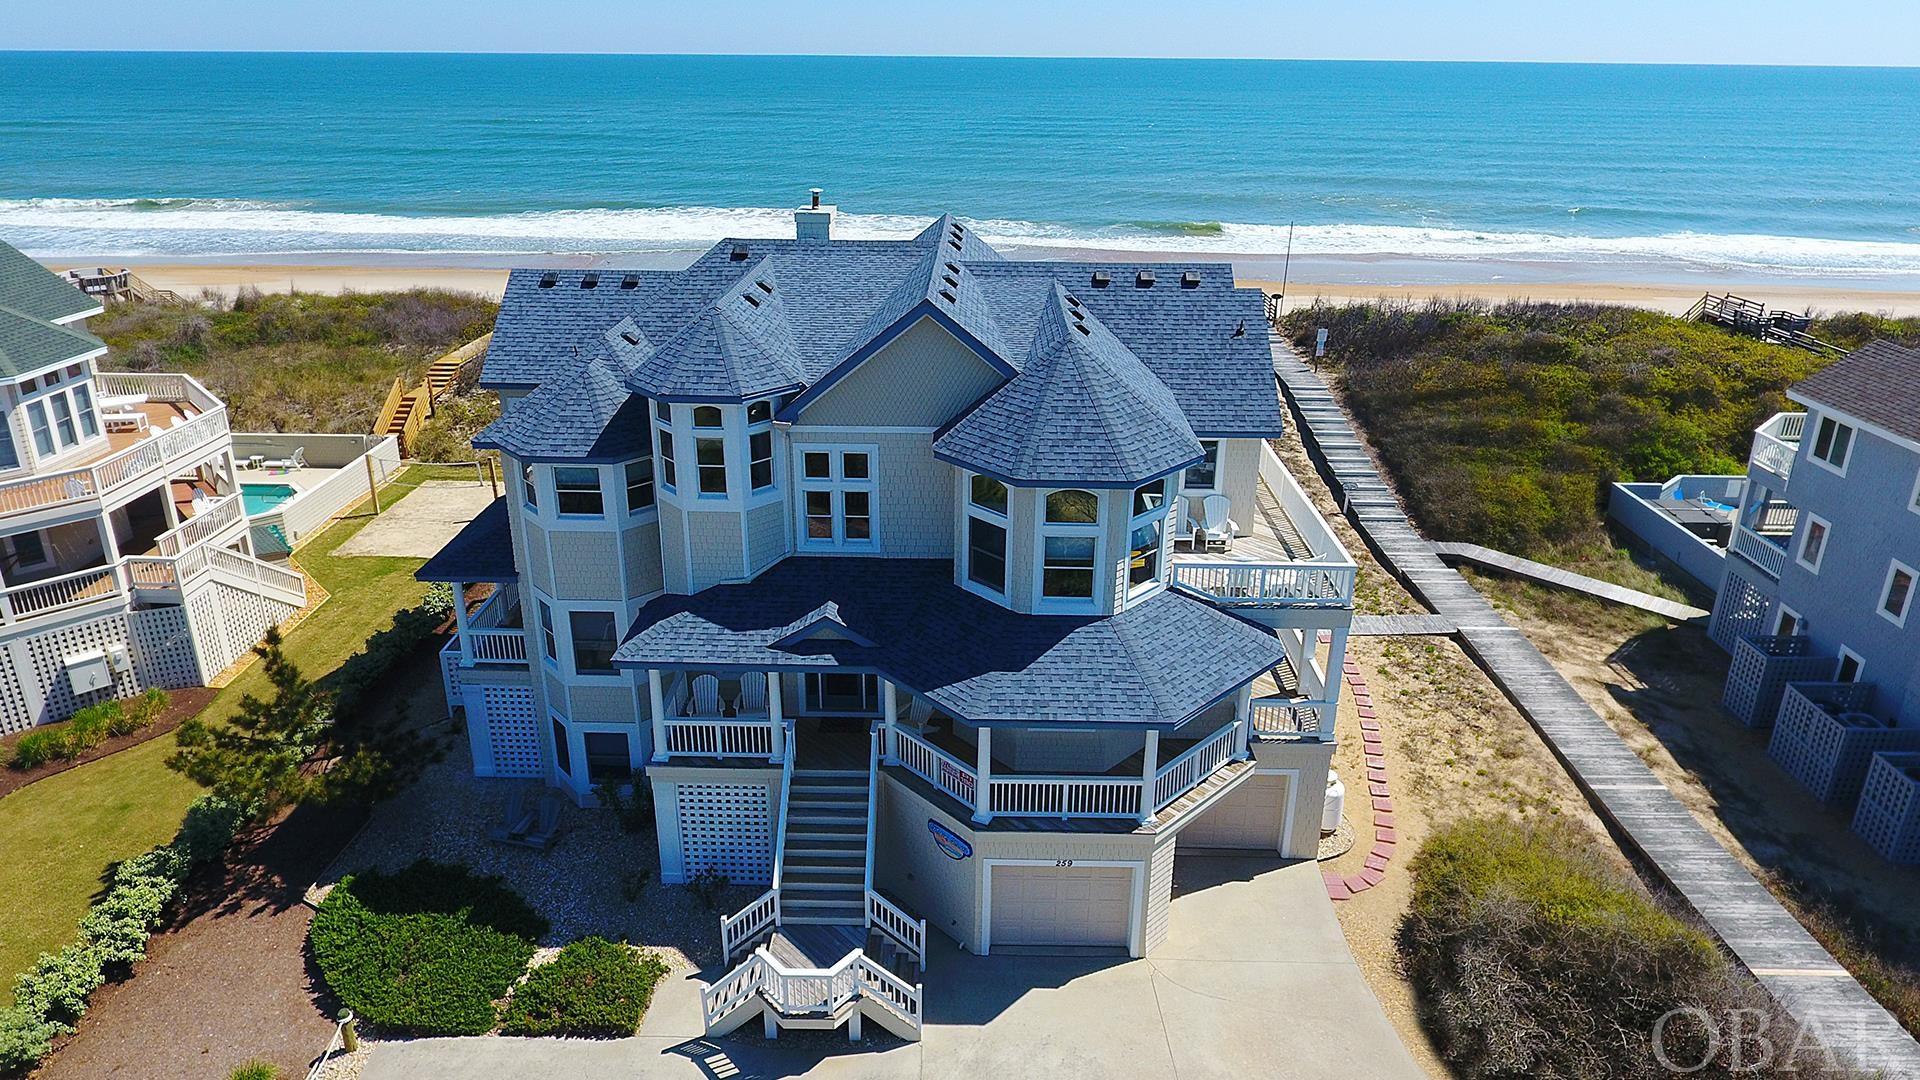 High end, well maintained Oceanfront Home.  Oversized rooms and living area.  Originally built for second home luxury.  Elevated, preferred X Flood Zone location.  100 feet of private dune frontage with unobstructed panoramic ocean views. Private ocean beach access walkway.  7 bedrooms/8.5 baths. 9 Ft ceilings.  2 car garage for easy dry entry and storage.  2 en suite bedrooms ( with water closet) on ground floor with easy access to recreation room and pool area.  Separate full bath for pool entry/exit.  Mid level has 4 bedrooms (3 with water closet) and a sizeable den/entertainment location. Large laundry room with double washer & dryer, additional shelving/storage.  Covered deck access for all.  Top floor has a spacious living area with flow through dining room/adjoining deck with exquisite views of the Currituck Sound.  An open gourmet kitchen with gas cook top and convenient double appliances.  Easy access to sun decks that look out at breathtaking views of the Atlantic sunrise and Currituck sound sunset.  A stone surround gas fireplace will keep you cozy in the cooler winter months.  In addition, there is a peaceful ships watch nook for more privacy.  A large en suite bedroom (separate water closet ) with its own private oceanside deck for personal solitude.  Separate office/sitting area close by.  Comfortable passage to all 3 levels with interior elevator for safety and comfort.